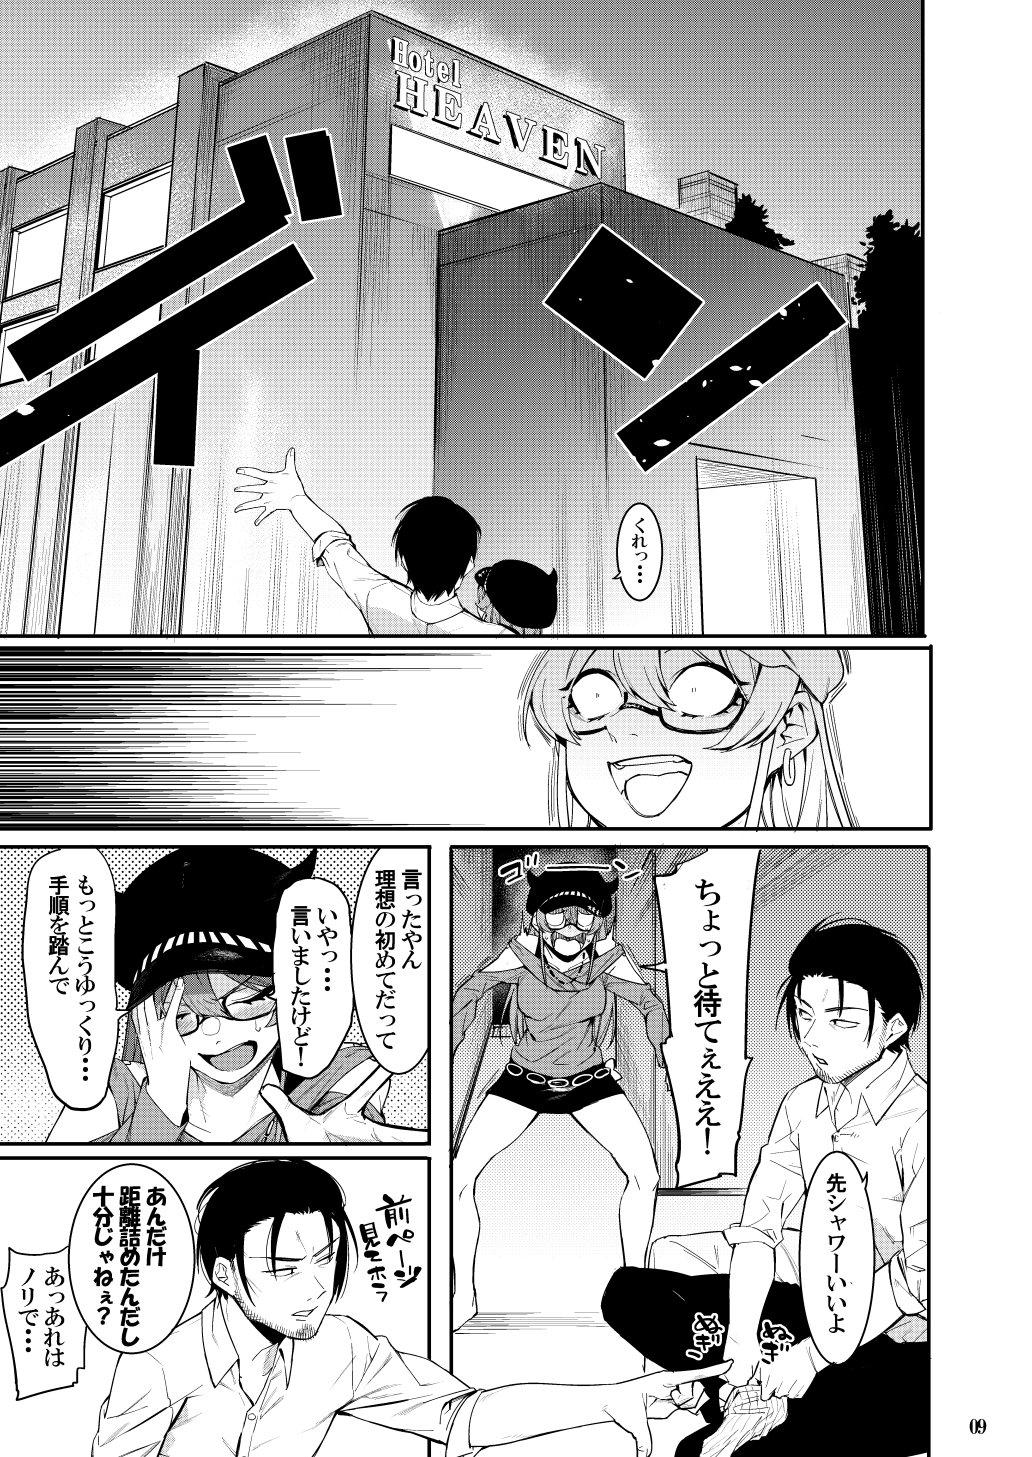 Sloppy Lipsync vol.1 1st.session - The idolmaster Trimmed - Page 8